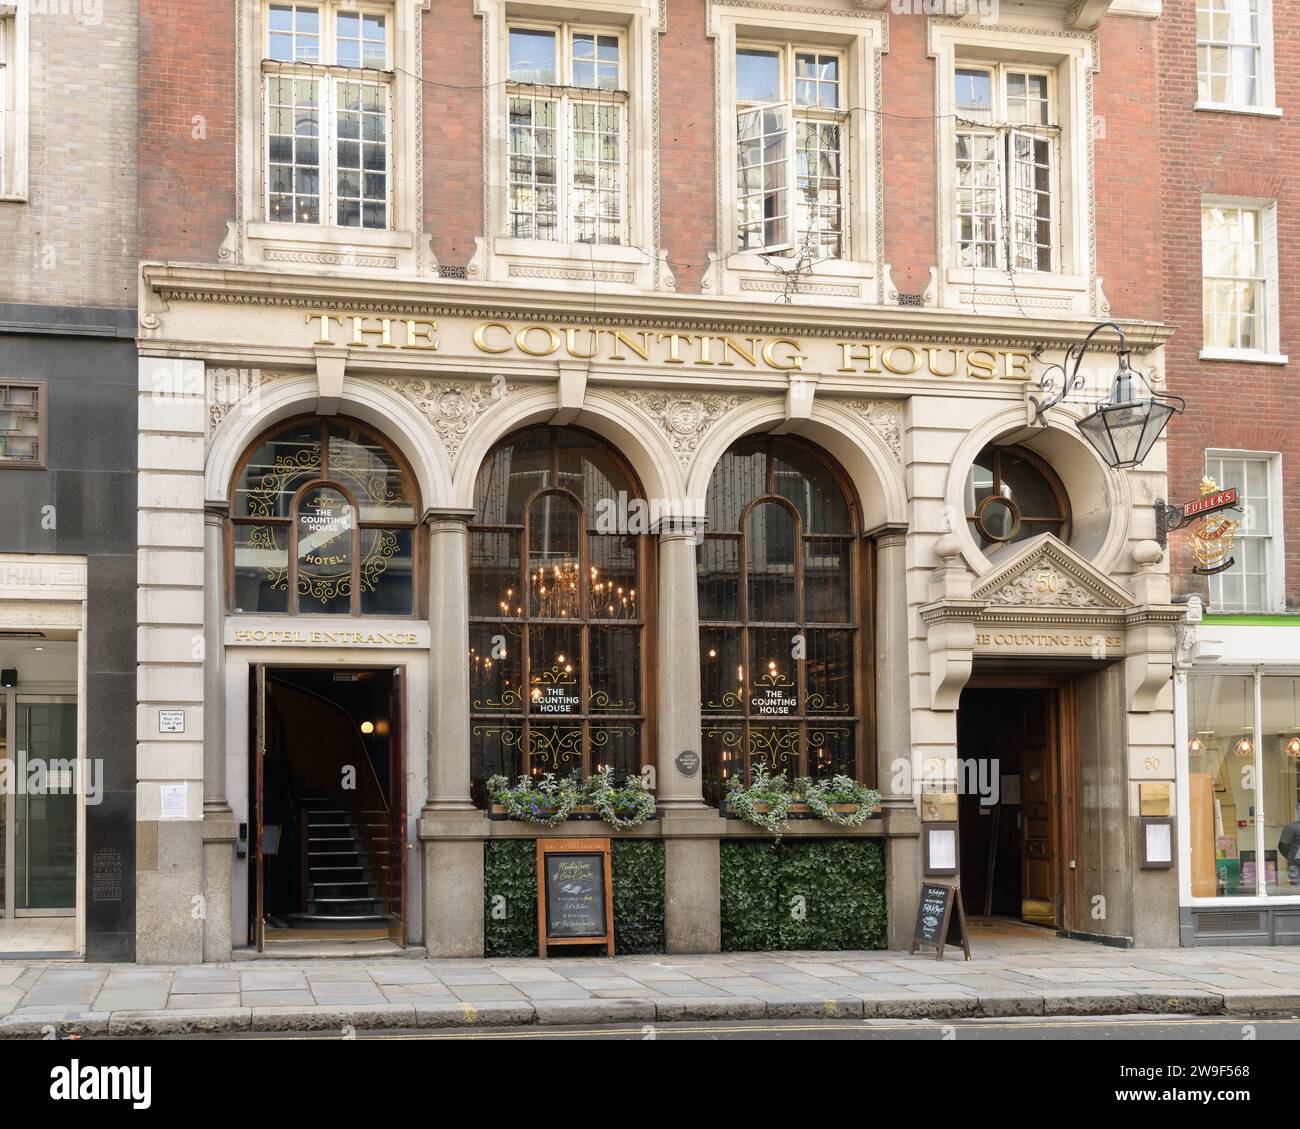 London, UK - March 16, 2023; The Counting House historic pub at 50 Cornhill in the City of London Stock Photo